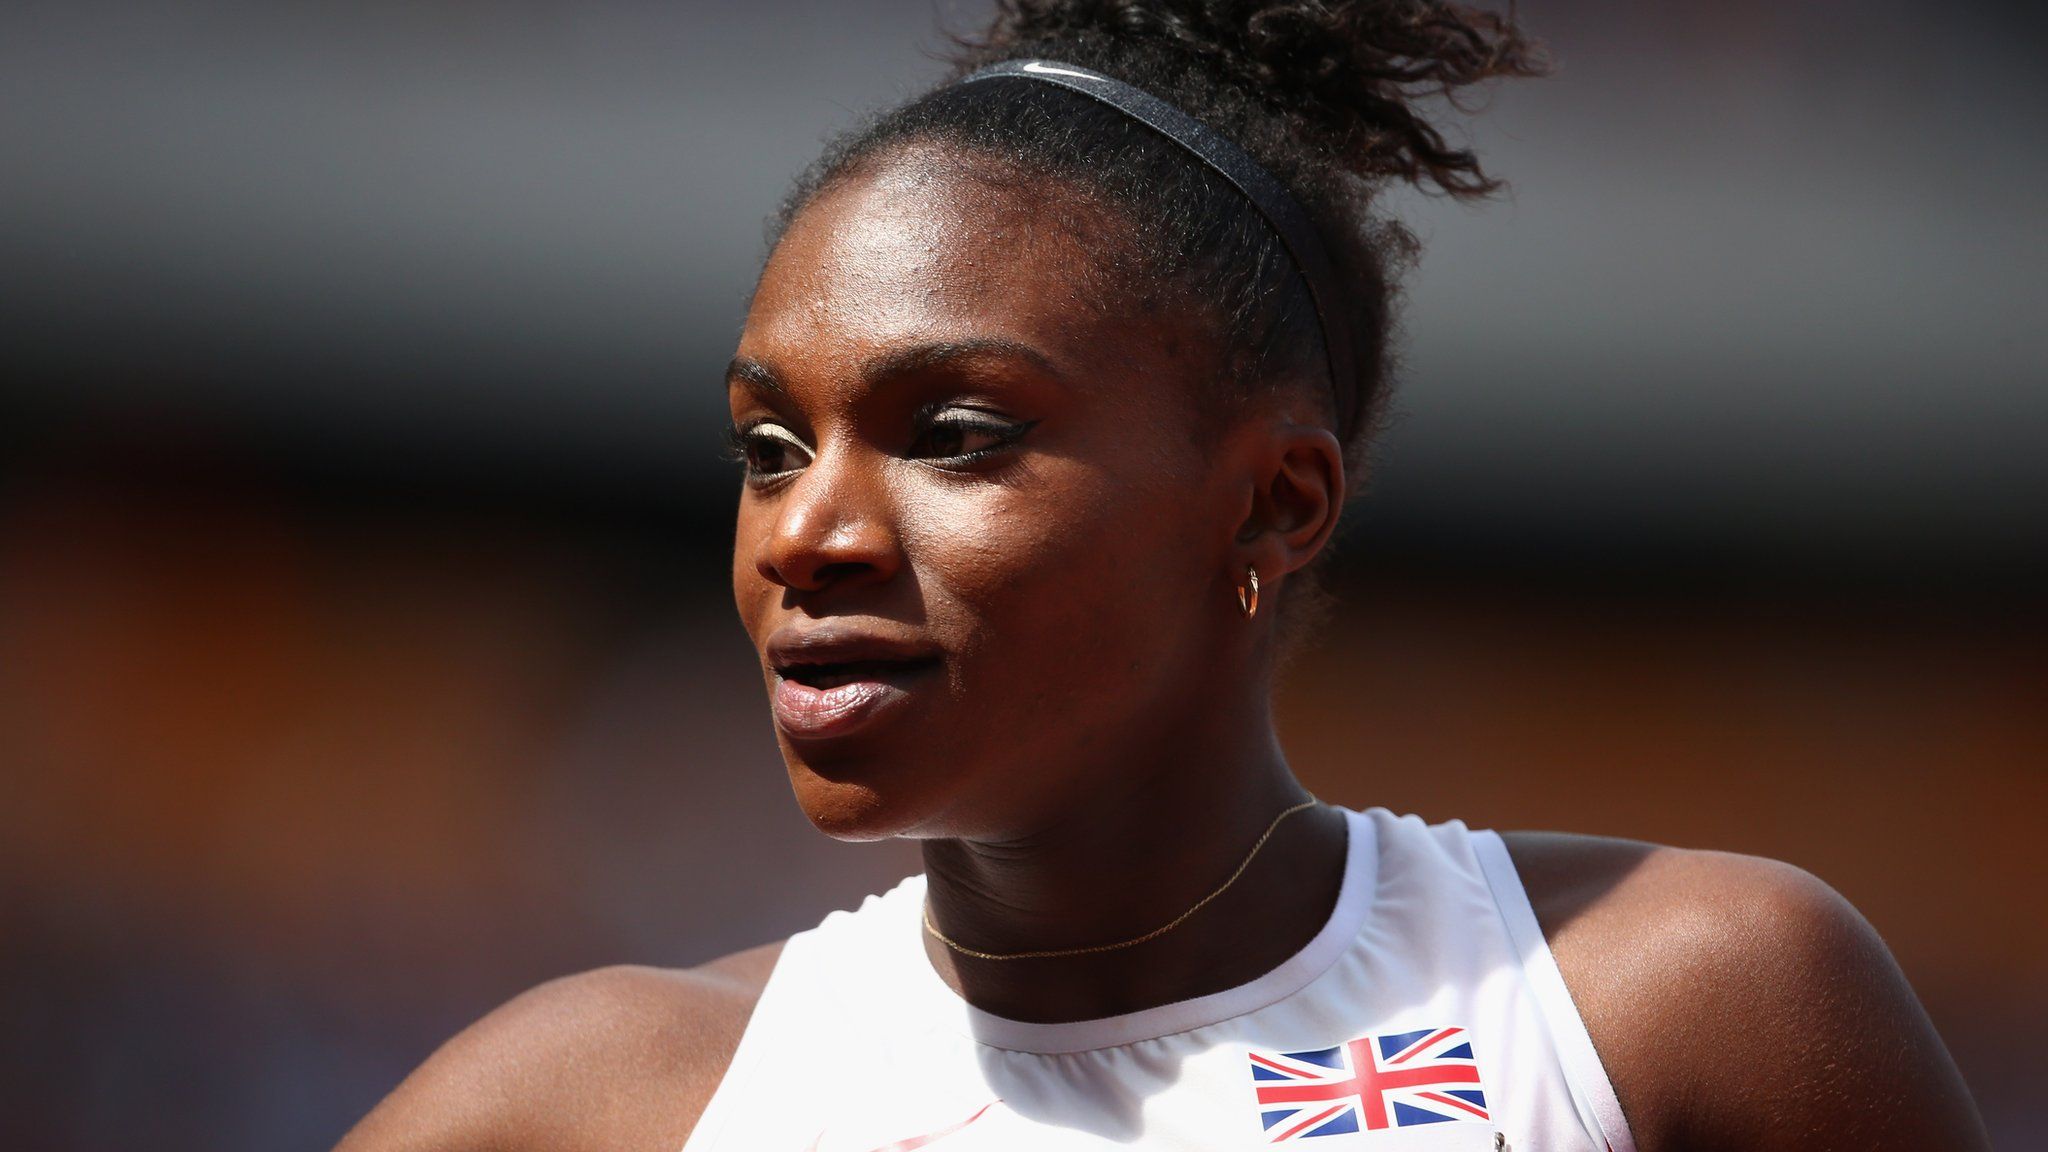 Dina Asher-Smith of Great Britain